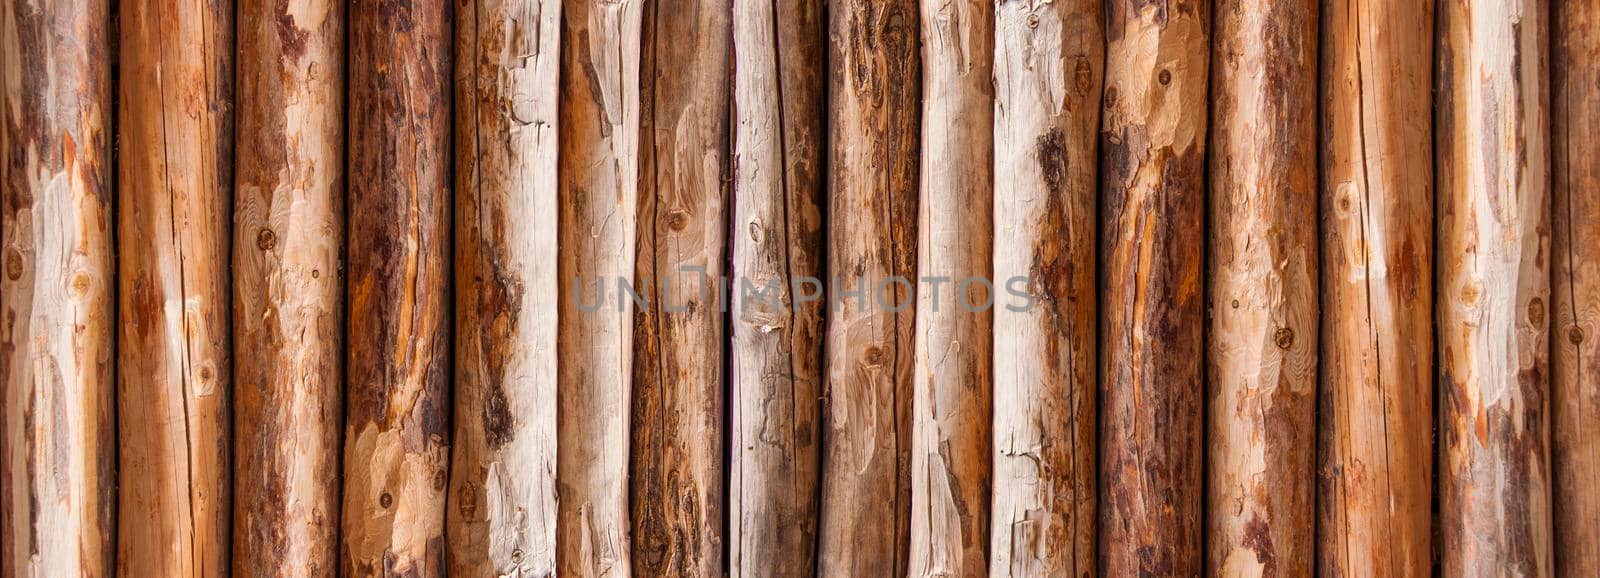 wooden texture, pine logs. Fence  by inxti